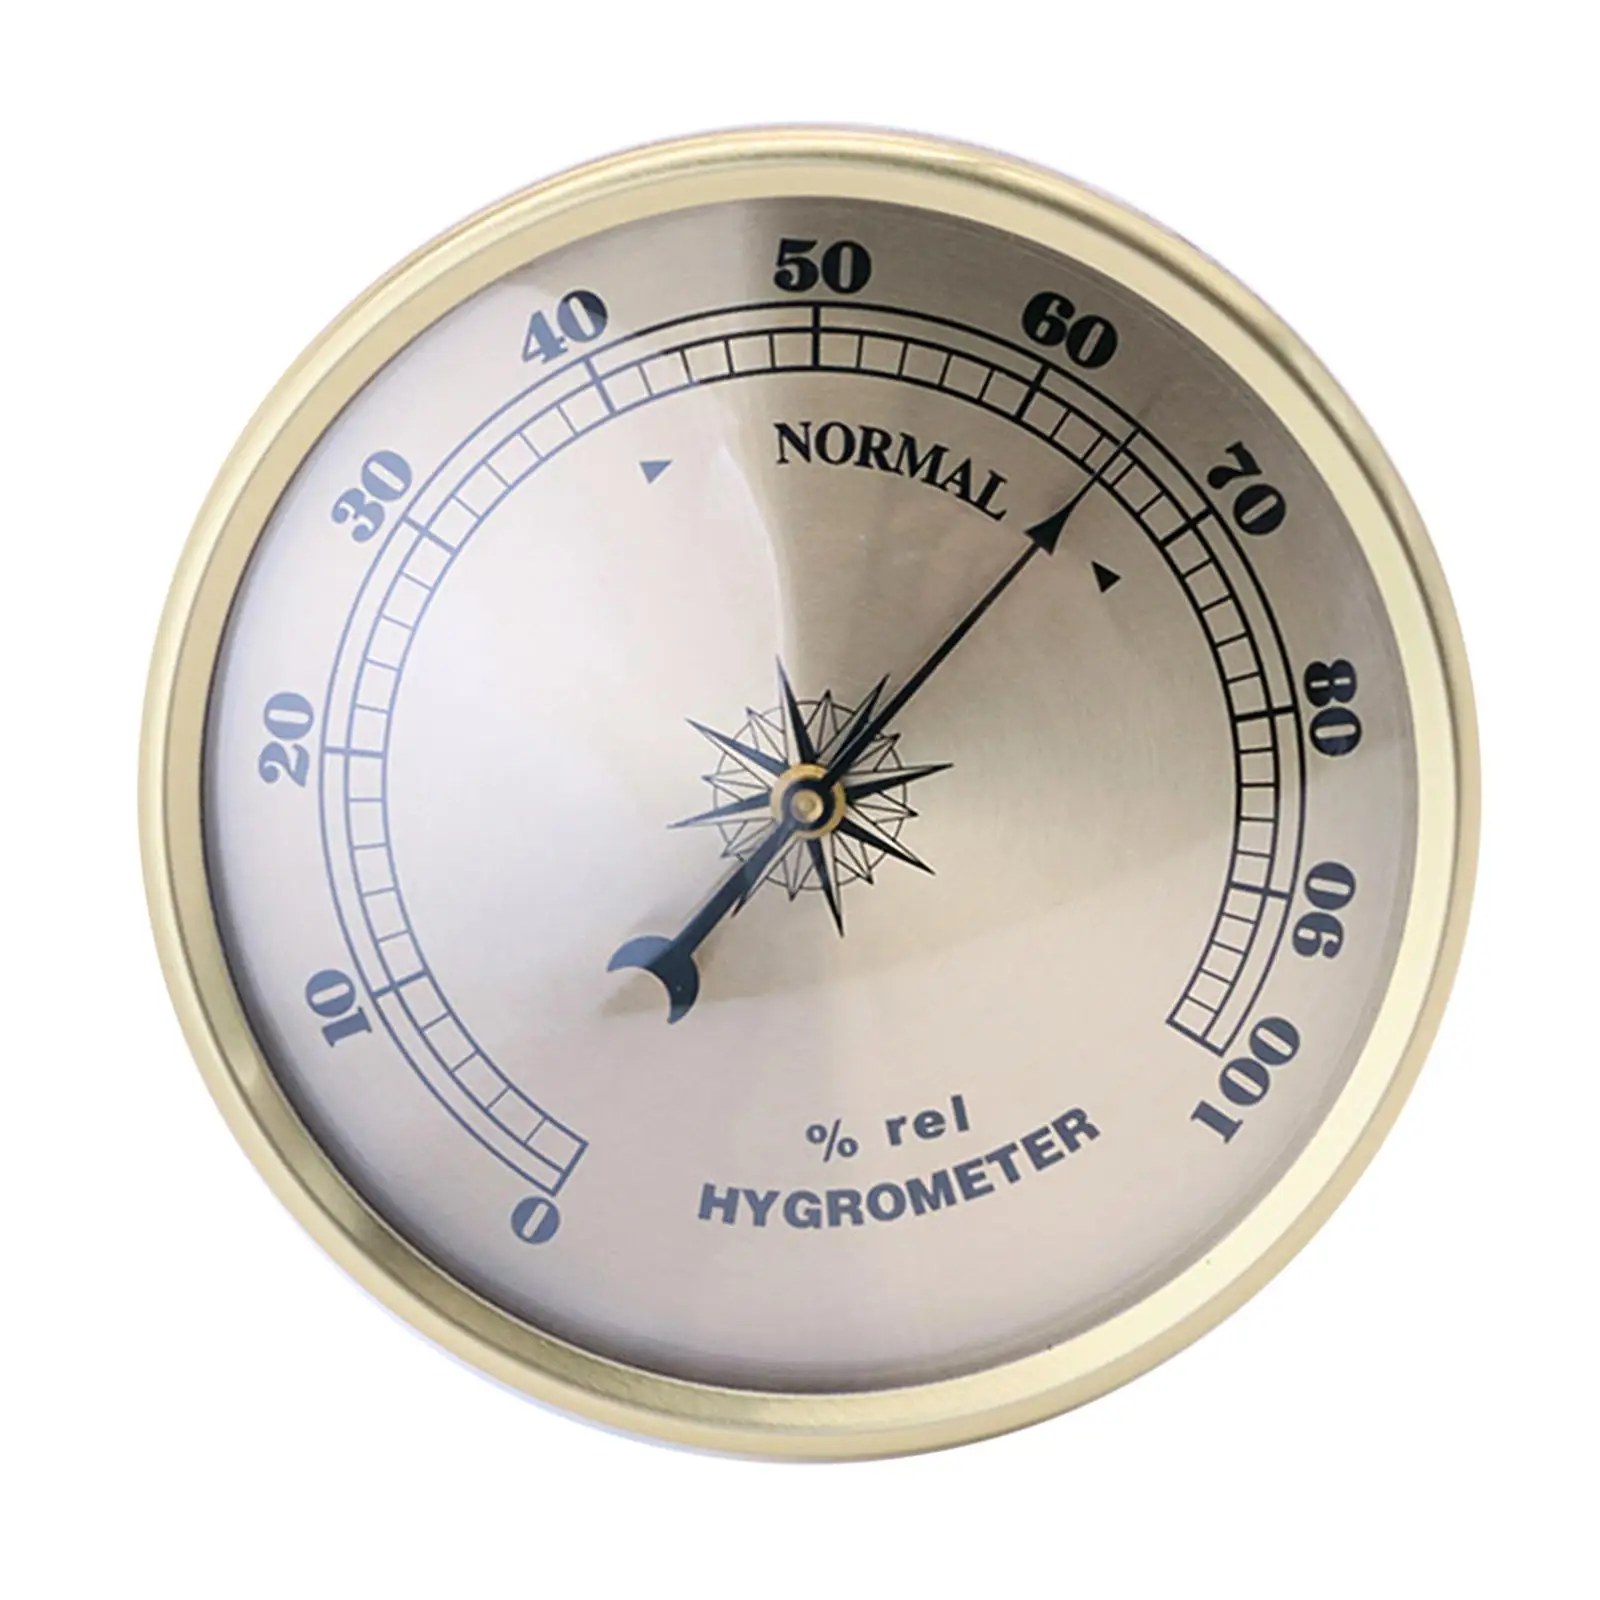 Accurate Humidity Meter/Gauge for Incubators Humidity Only 2'' Diameter 